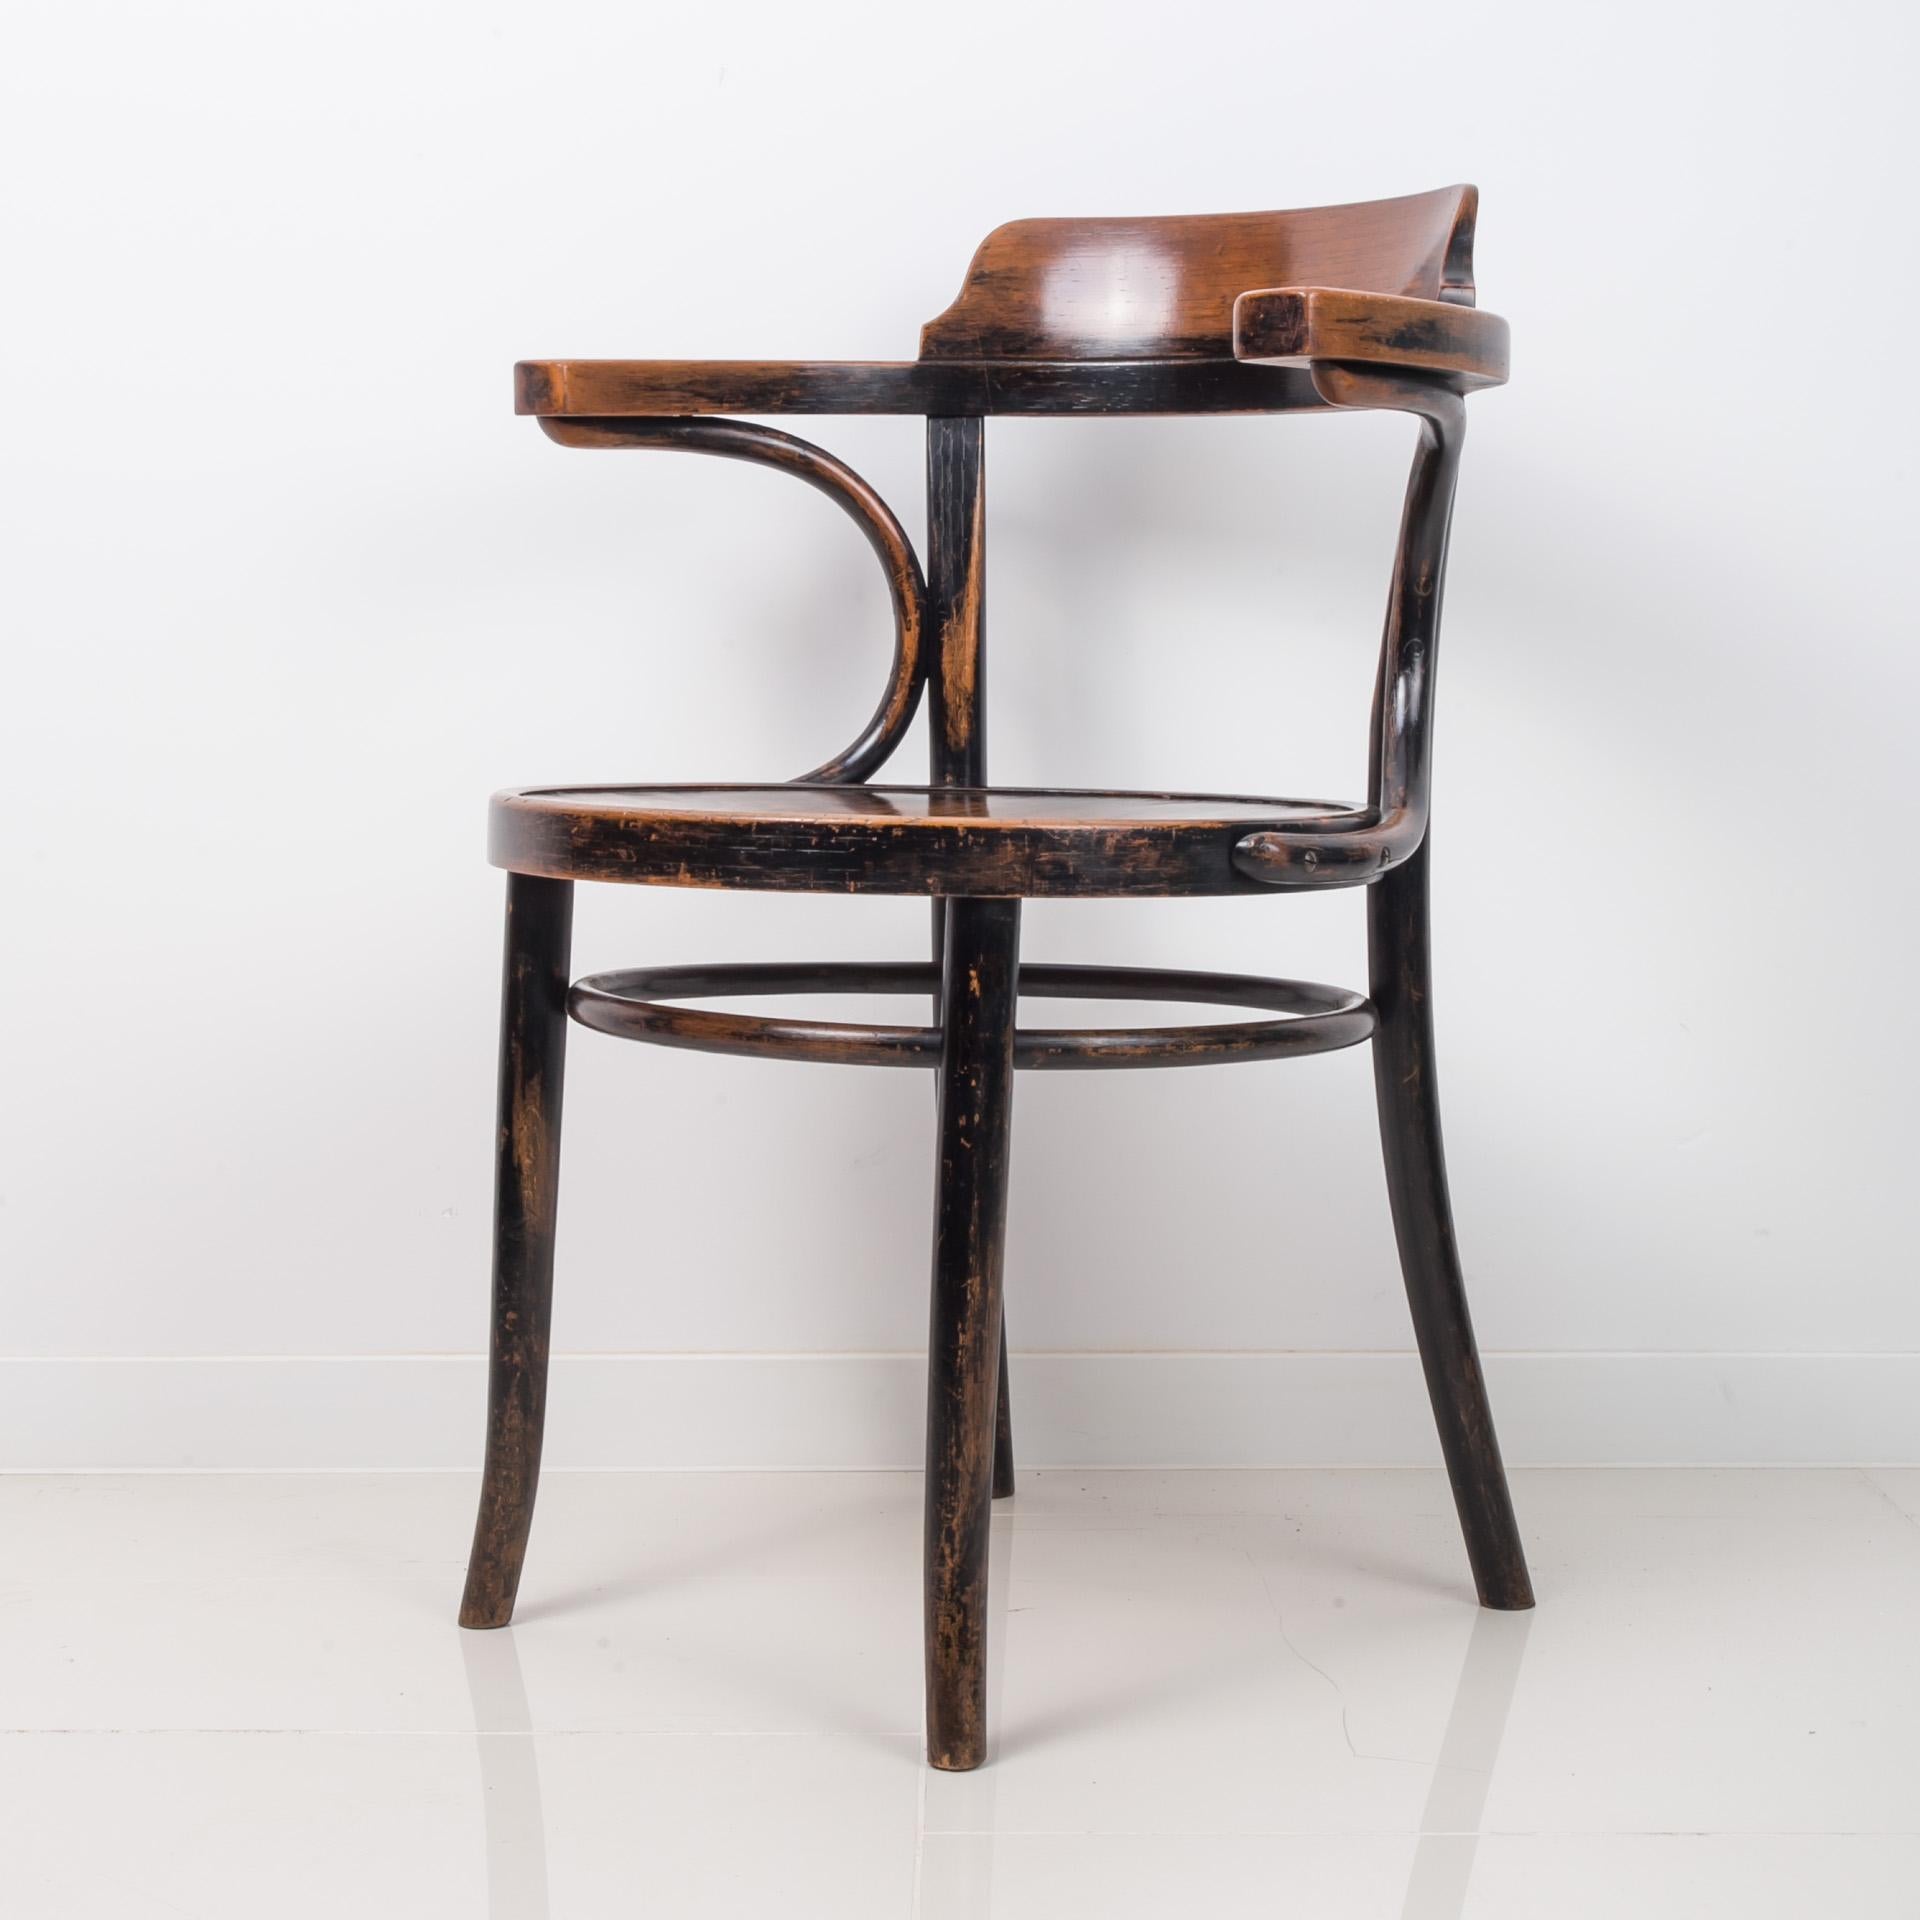 Austrian Iconic Thonet Chair Designed by M. Thonet, Bentwood, 1920s